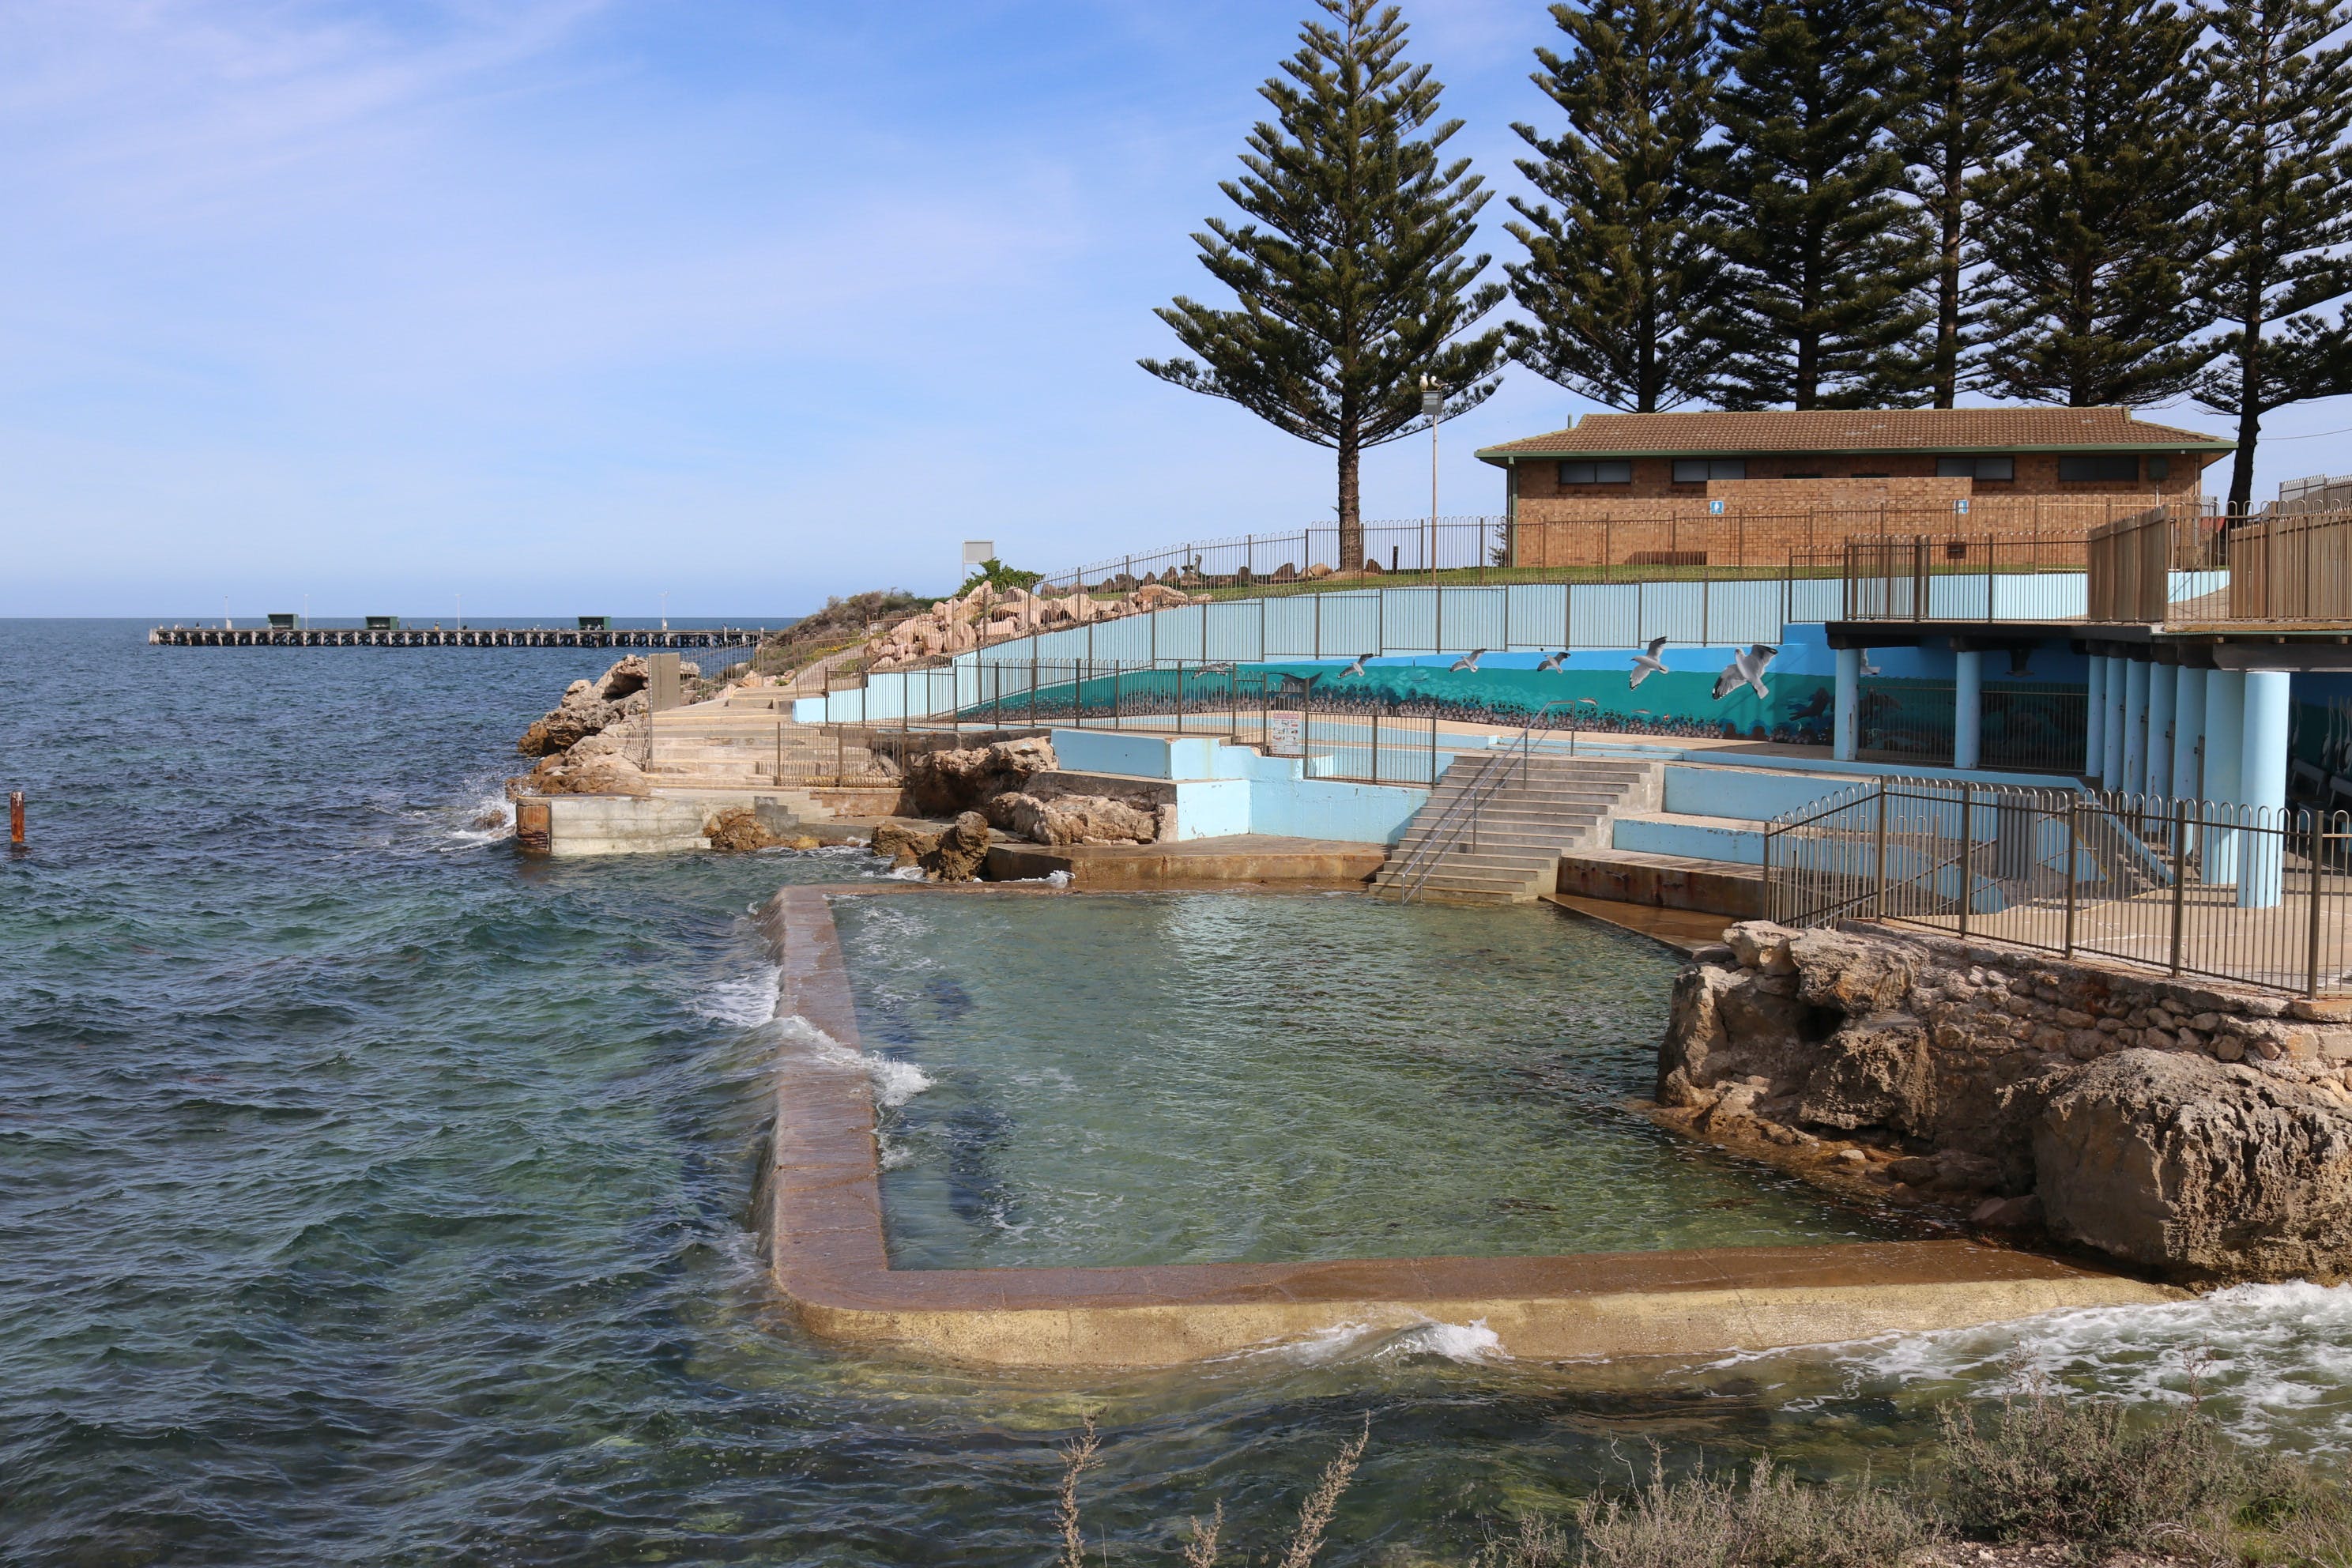 Edithburgh Tidal Pool - Find Attractions